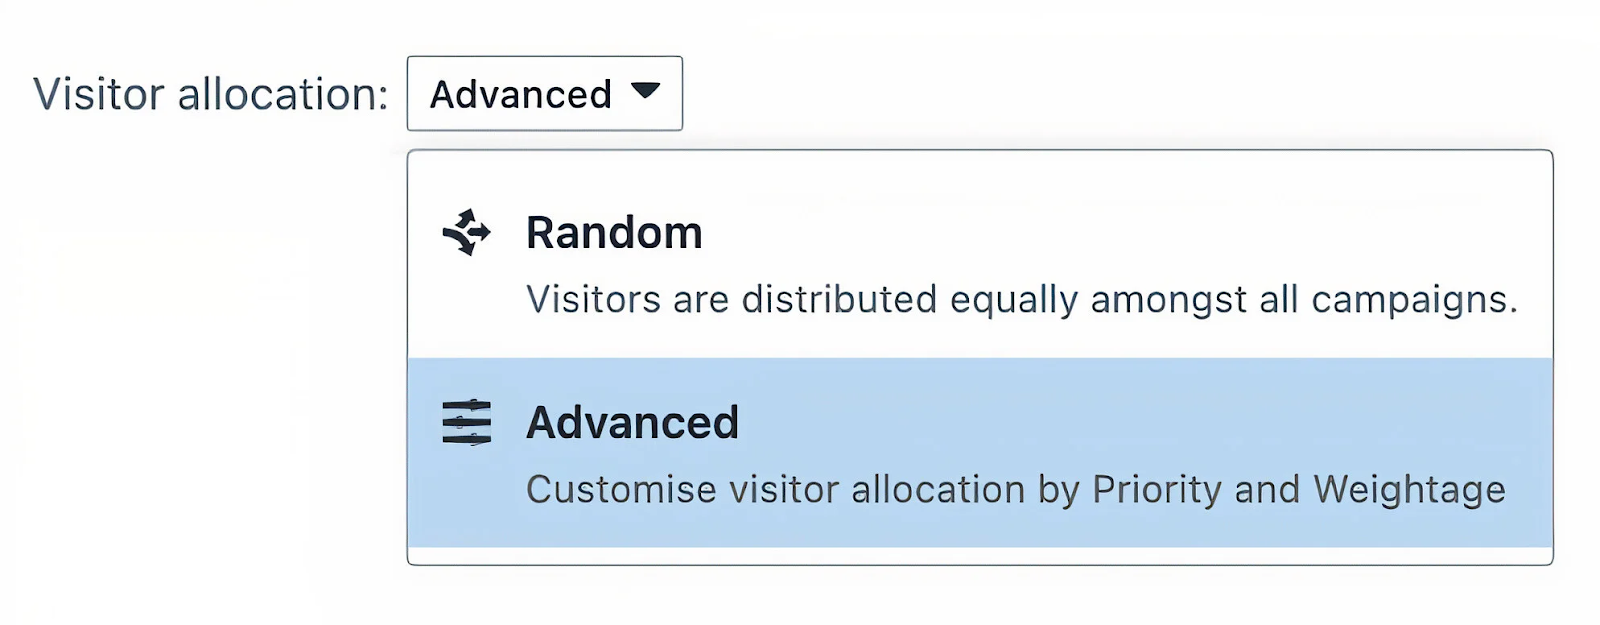 Mutually exclusive group with advanced or random allocation